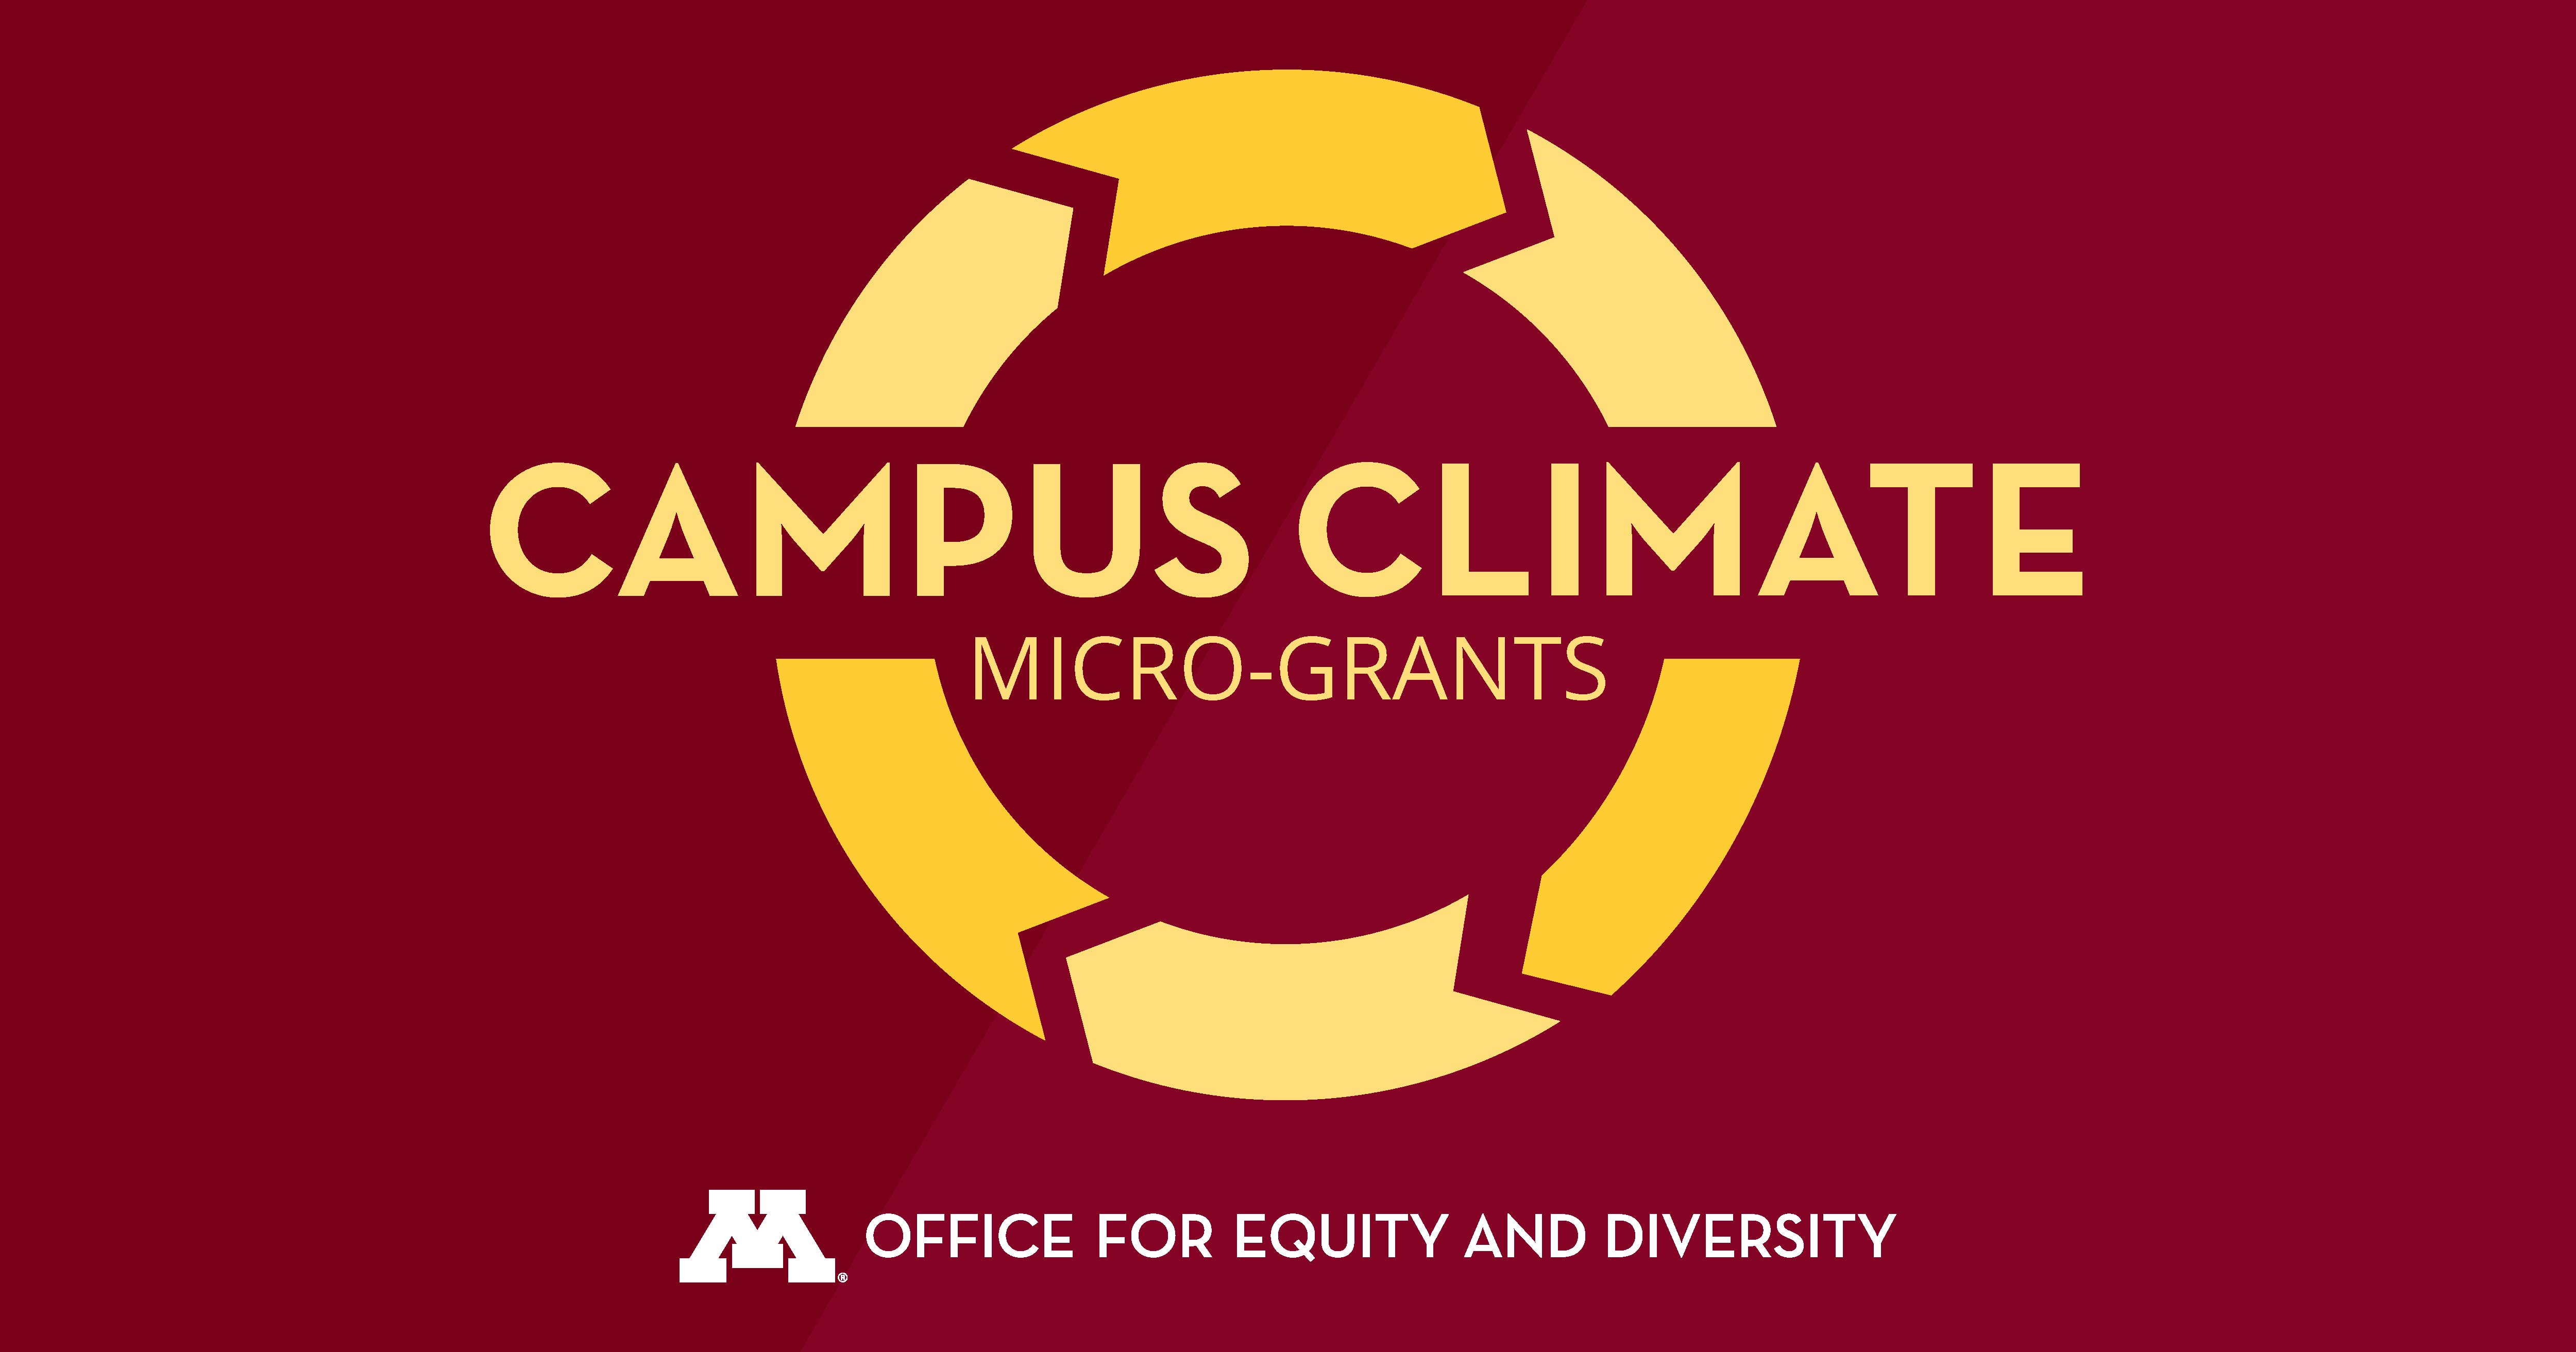 Campus Climate Micro-Grants program logo, sponsored by the University's Office for Equity and Diversity.